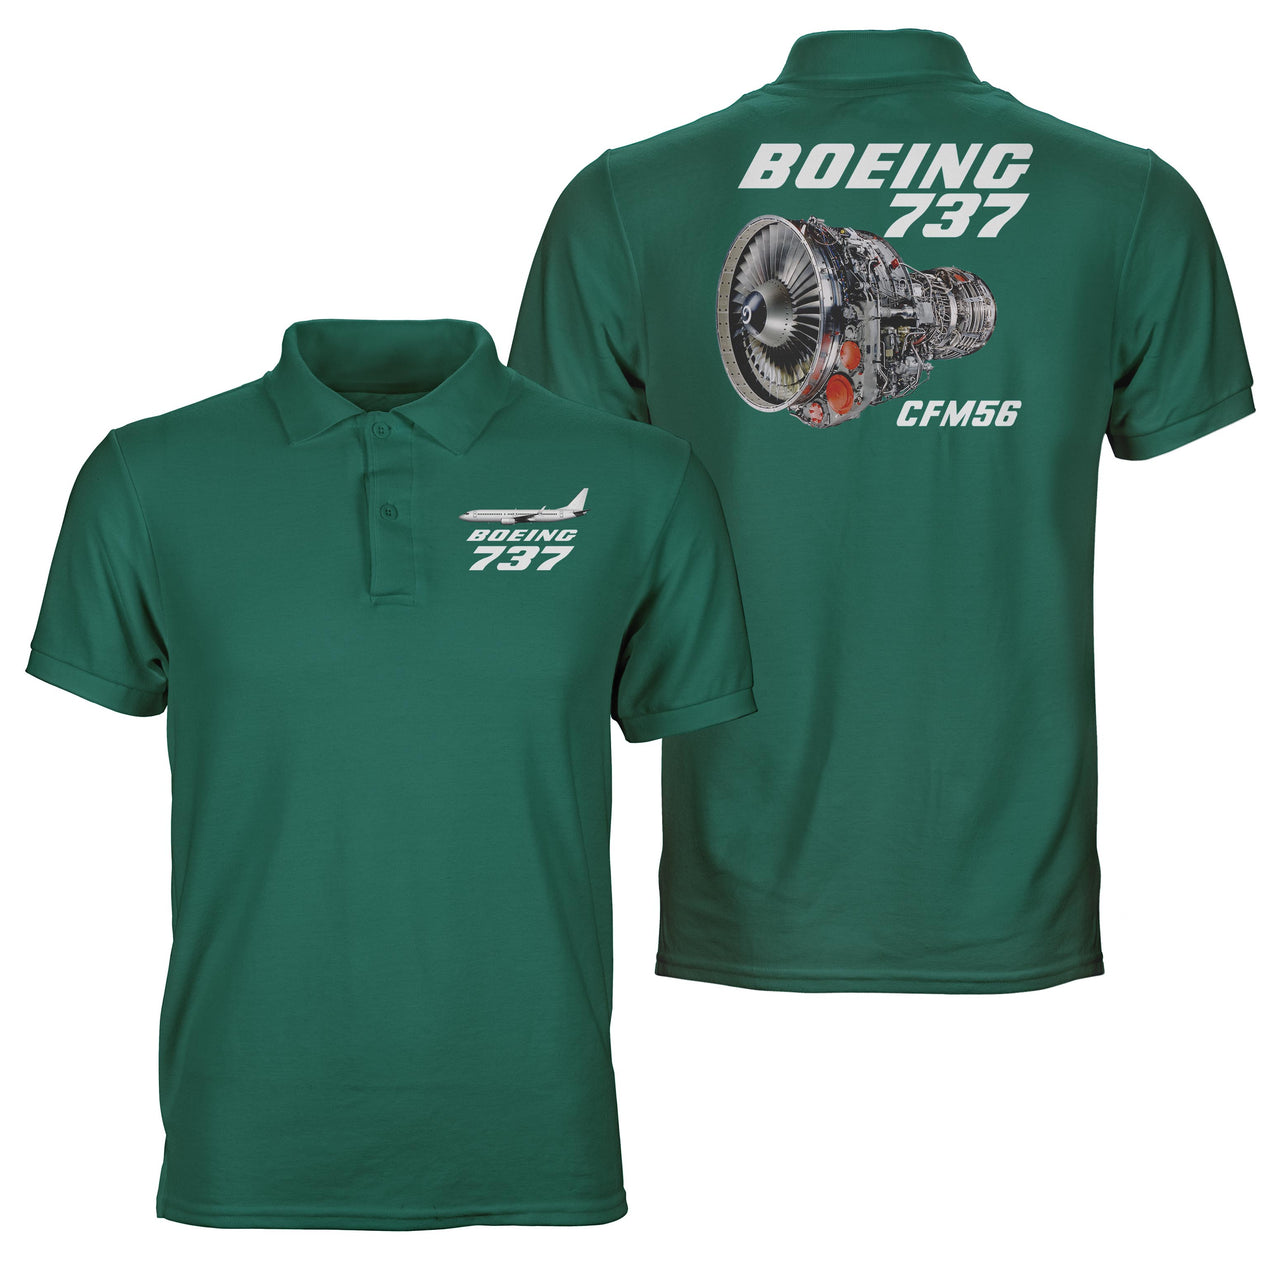 Boeing 737 Engine & CFM56 Designed Double Side Polo T-Shirts